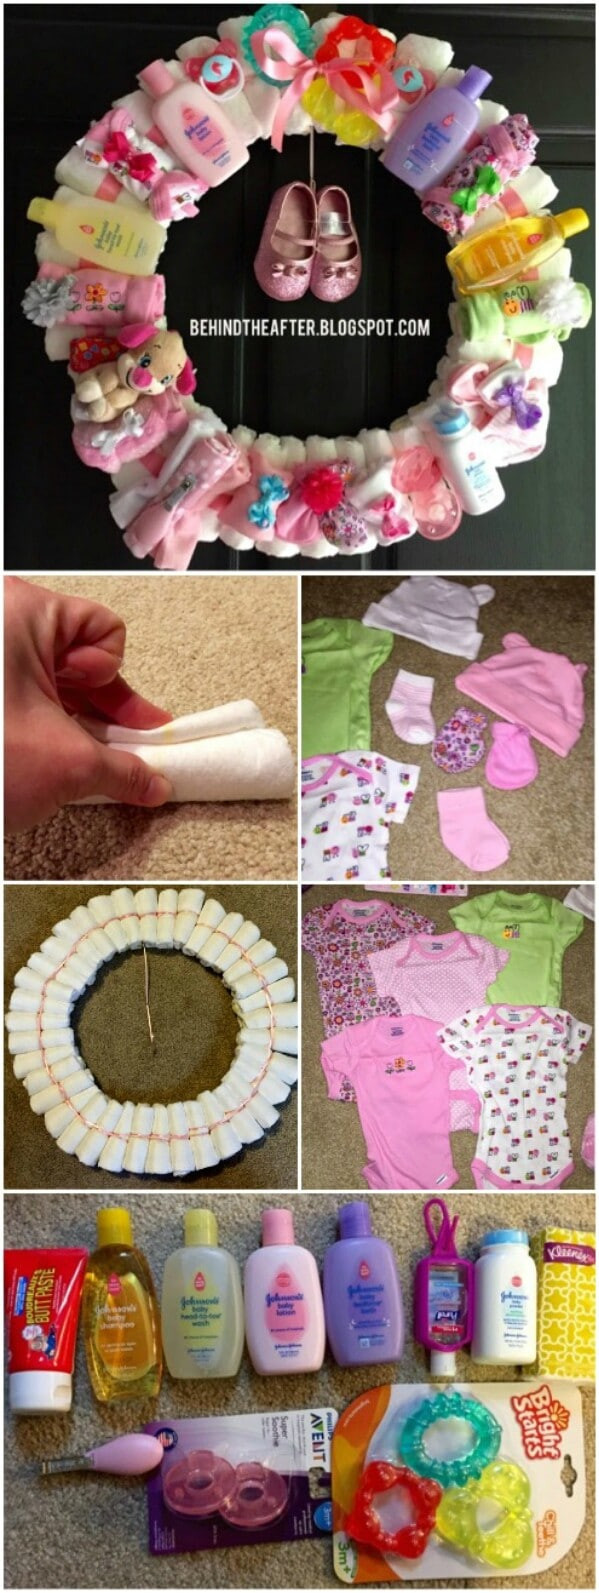 Diy Baby Gift Ideas
 25 Enchantingly Adorable Baby Shower Gift Ideas That Will